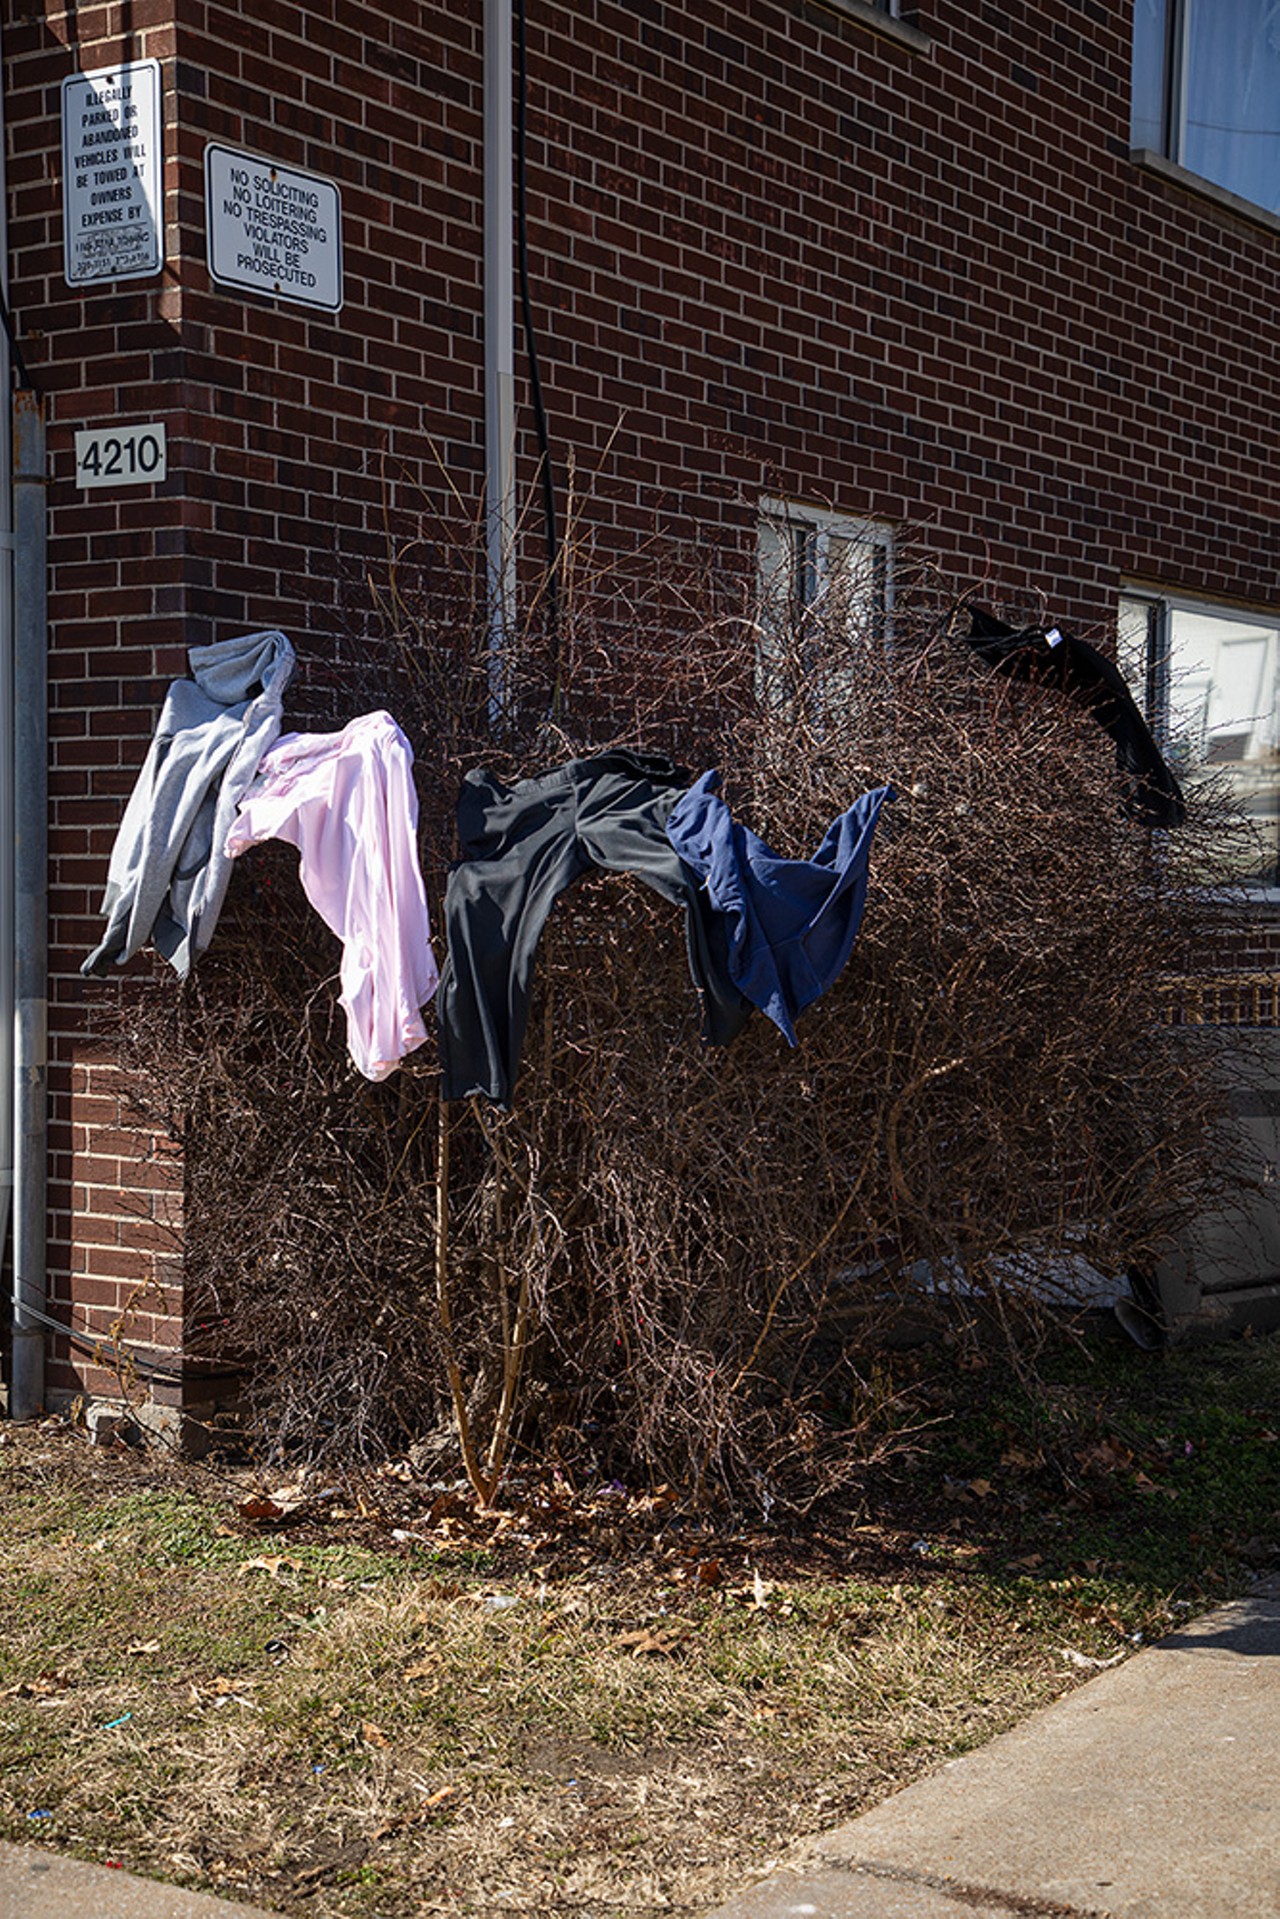 Clothing hangs to dry on a bush outside of an apartment building owned by Cuong Q. Tran.